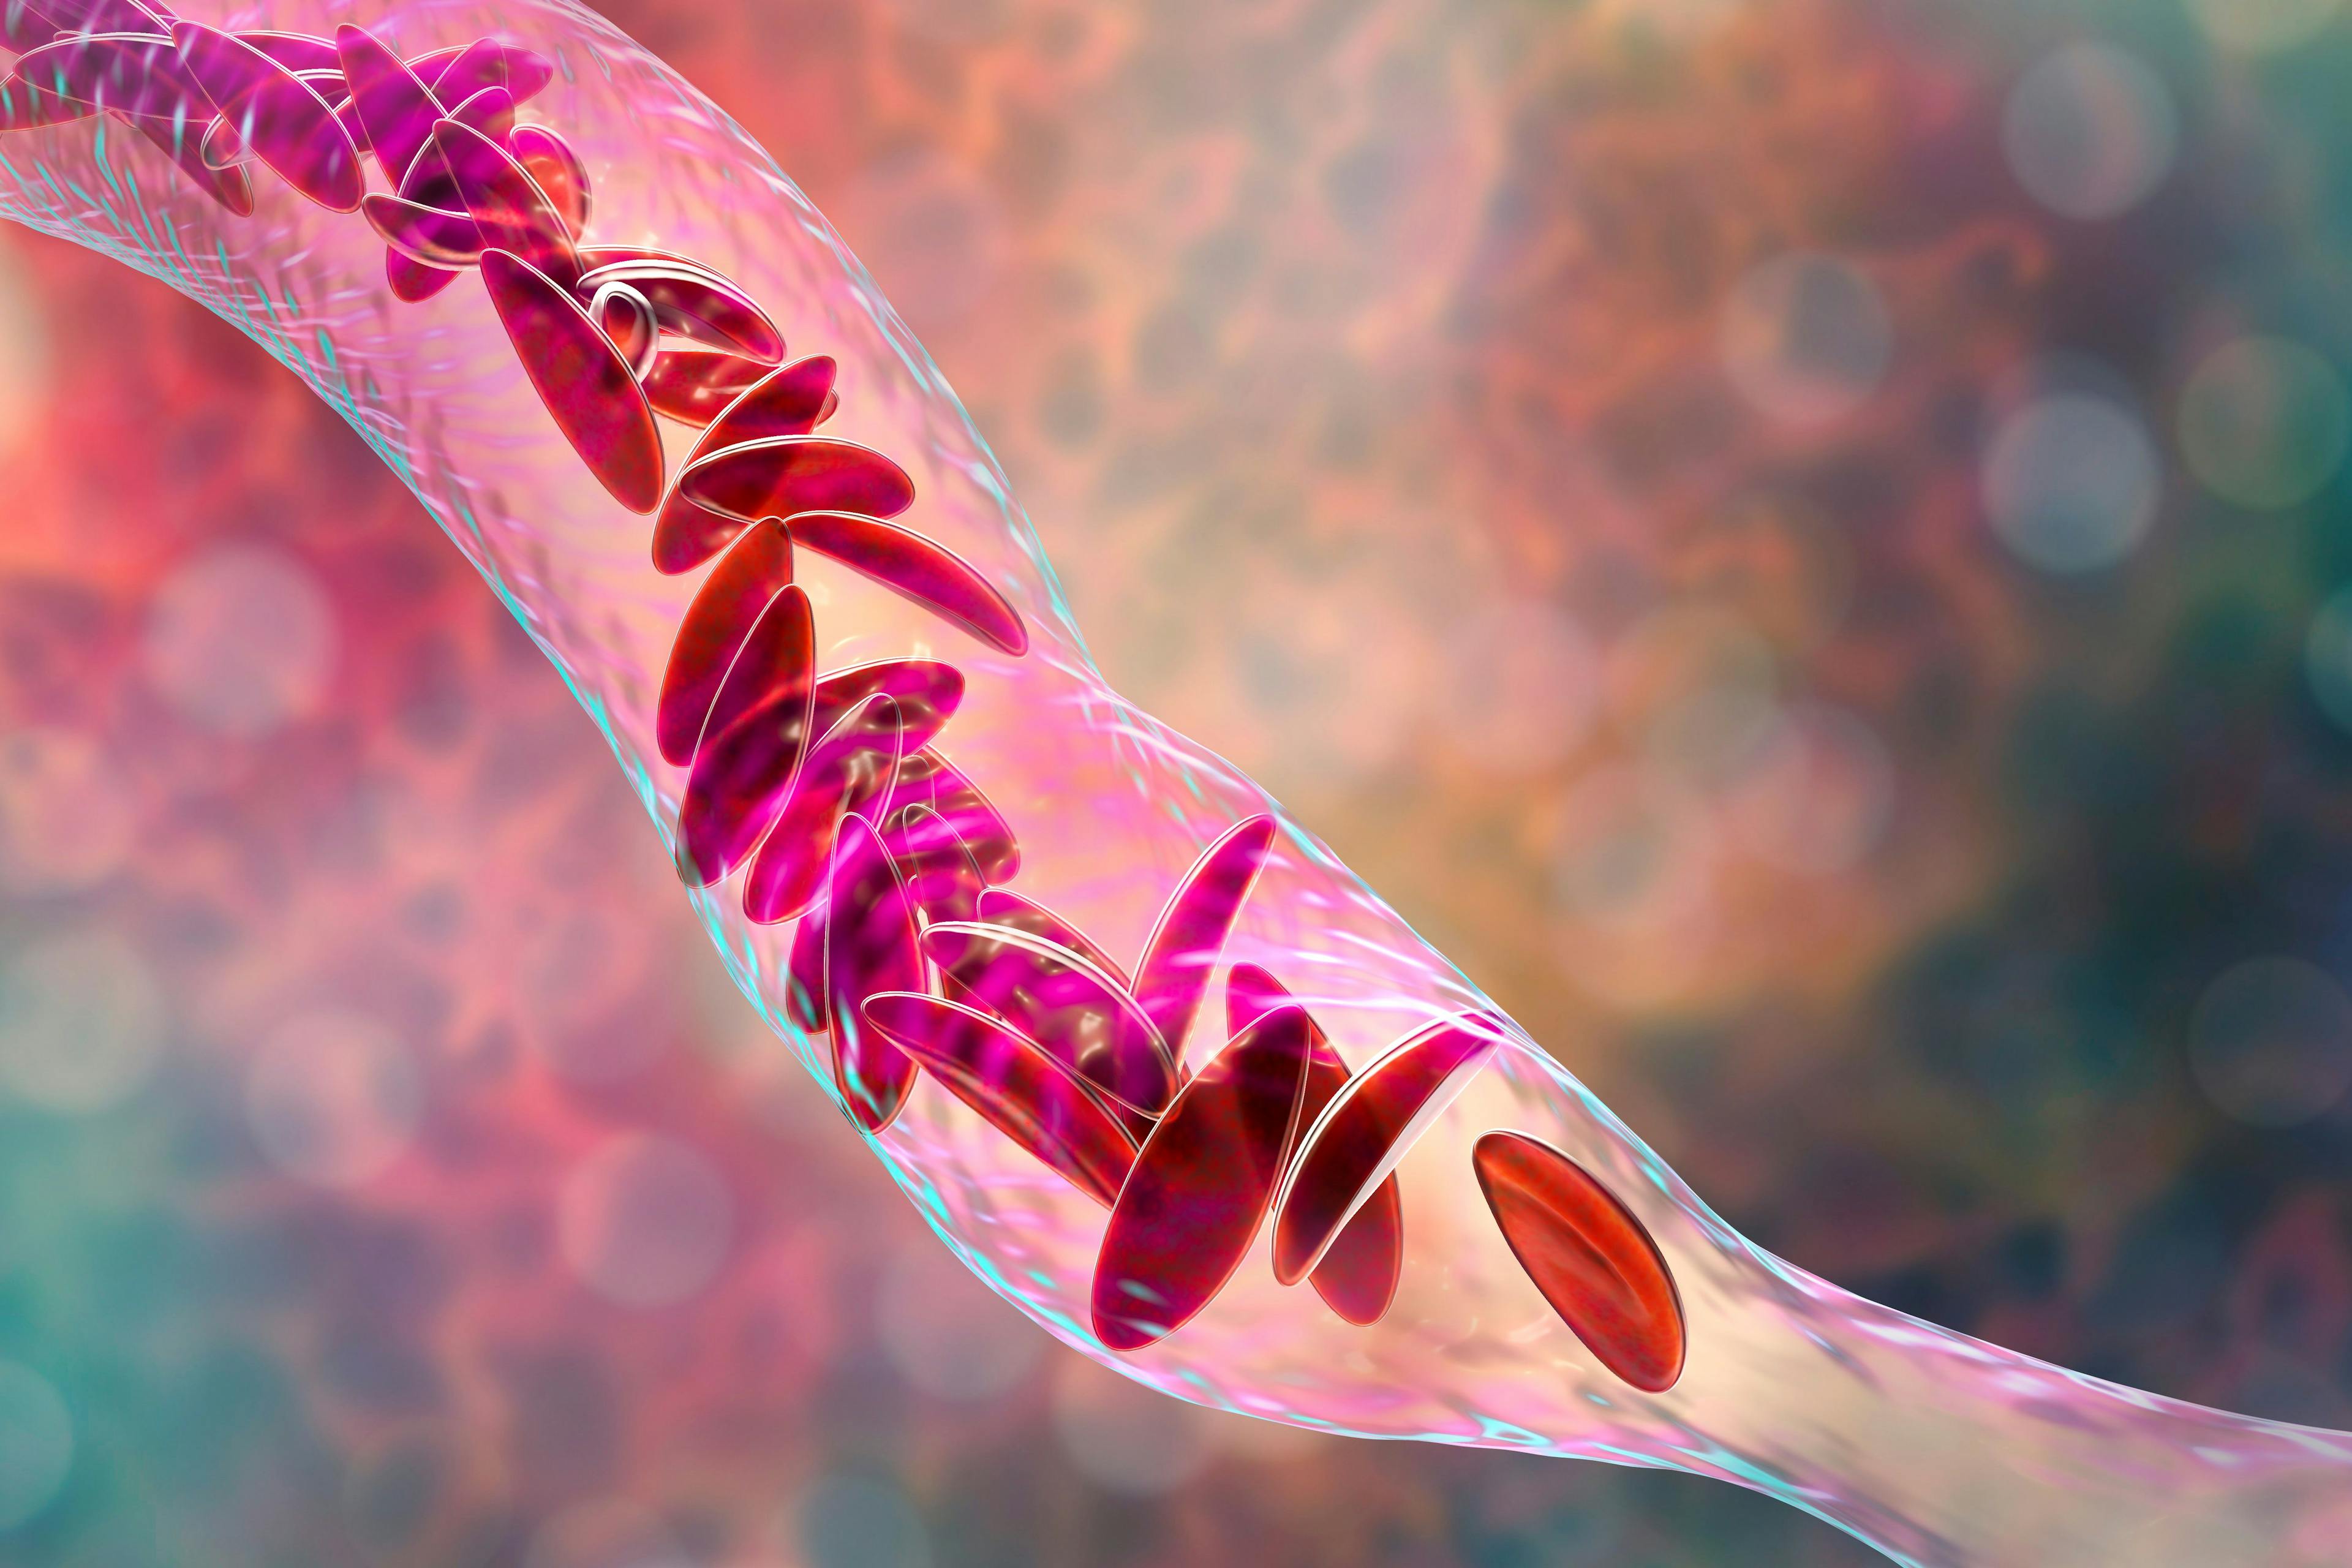 Sickle cell anemia, 3D illustration. Clumps of sickle cell block the blood vessel | Image Credit: Dr_Microbe - stock.adobe.com